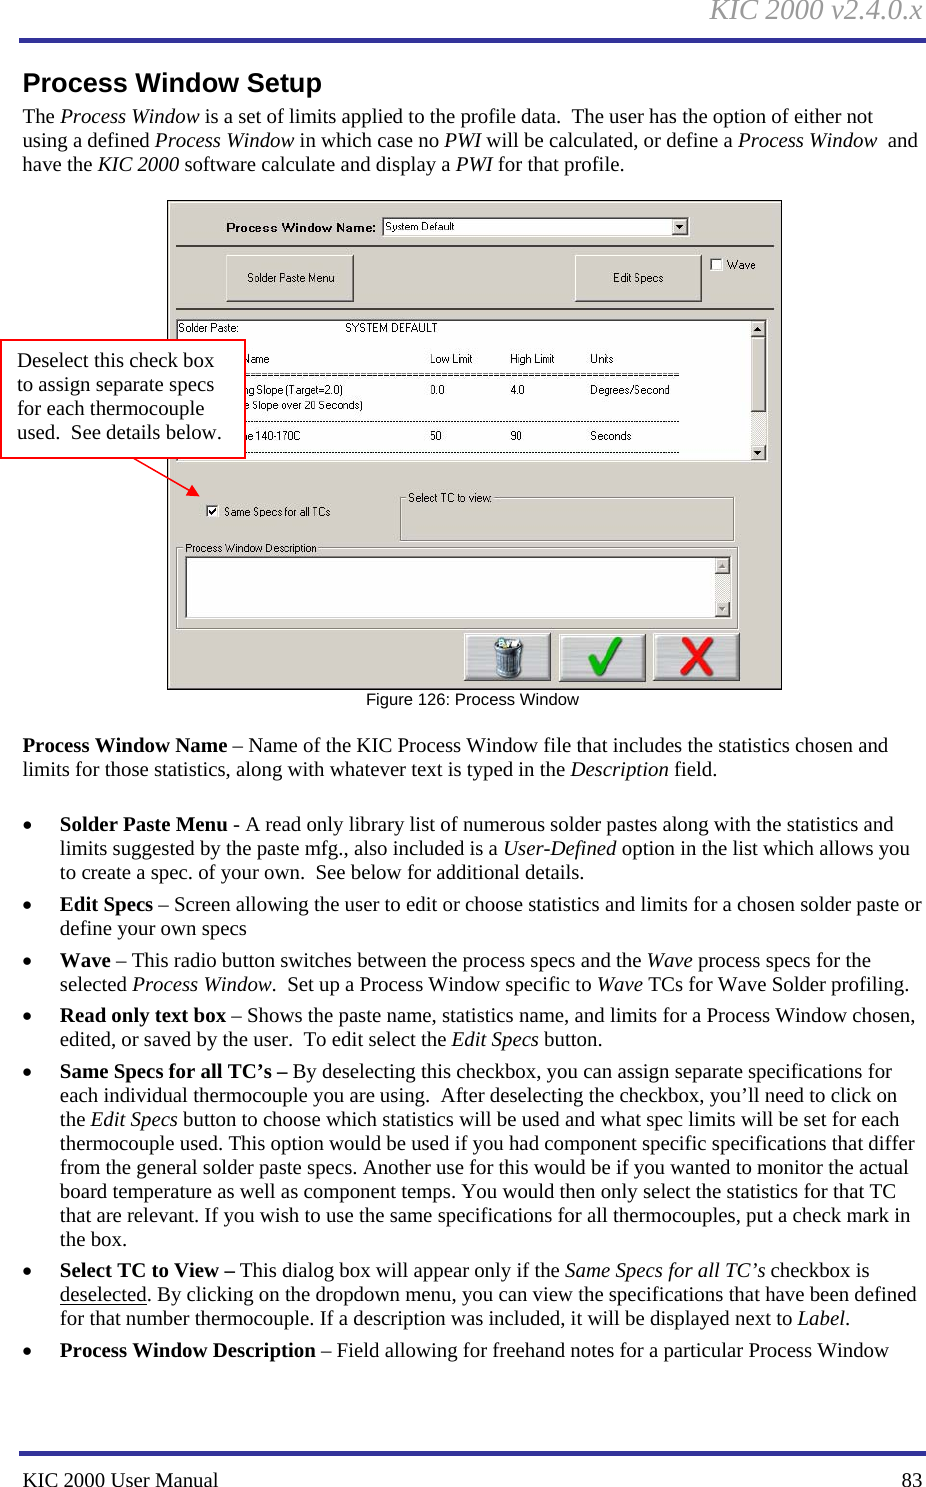 KIC 2000 v2.4.0.x KIC 2000 User Manual    83 Process Window Setup The Process Window is a set of limits applied to the profile data.  The user has the option of either not using a defined Process Window in which case no PWI will be calculated, or define a Process Window  and have the KIC 2000 software calculate and display a PWI for that profile.     Figure 126: Process Window  Process Window Name – Name of the KIC Process Window file that includes the statistics chosen and limits for those statistics, along with whatever text is typed in the Description field.  • Solder Paste Menu - A read only library list of numerous solder pastes along with the statistics and limits suggested by the paste mfg., also included is a User-Defined option in the list which allows you to create a spec. of your own.  See below for additional details. • Edit Specs – Screen allowing the user to edit or choose statistics and limits for a chosen solder paste or define your own specs • Wave – This radio button switches between the process specs and the Wave process specs for the selected Process Window.  Set up a Process Window specific to Wave TCs for Wave Solder profiling.   • Read only text box – Shows the paste name, statistics name, and limits for a Process Window chosen, edited, or saved by the user.  To edit select the Edit Specs button.   • Same Specs for all TC’s – By deselecting this checkbox, you can assign separate specifications for each individual thermocouple you are using.  After deselecting the checkbox, you’ll need to click on the Edit Specs button to choose which statistics will be used and what spec limits will be set for each thermocouple used. This option would be used if you had component specific specifications that differ from the general solder paste specs. Another use for this would be if you wanted to monitor the actual board temperature as well as component temps. You would then only select the statistics for that TC that are relevant. If you wish to use the same specifications for all thermocouples, put a check mark in the box. • Select TC to View – This dialog box will appear only if the Same Specs for all TC’s checkbox is deselected. By clicking on the dropdown menu, you can view the specifications that have been defined for that number thermocouple. If a description was included, it will be displayed next to Label.  • Process Window Description – Field allowing for freehand notes for a particular Process Window  Deselect this check box to assign separate specs for each thermocouple used.  See details below. 